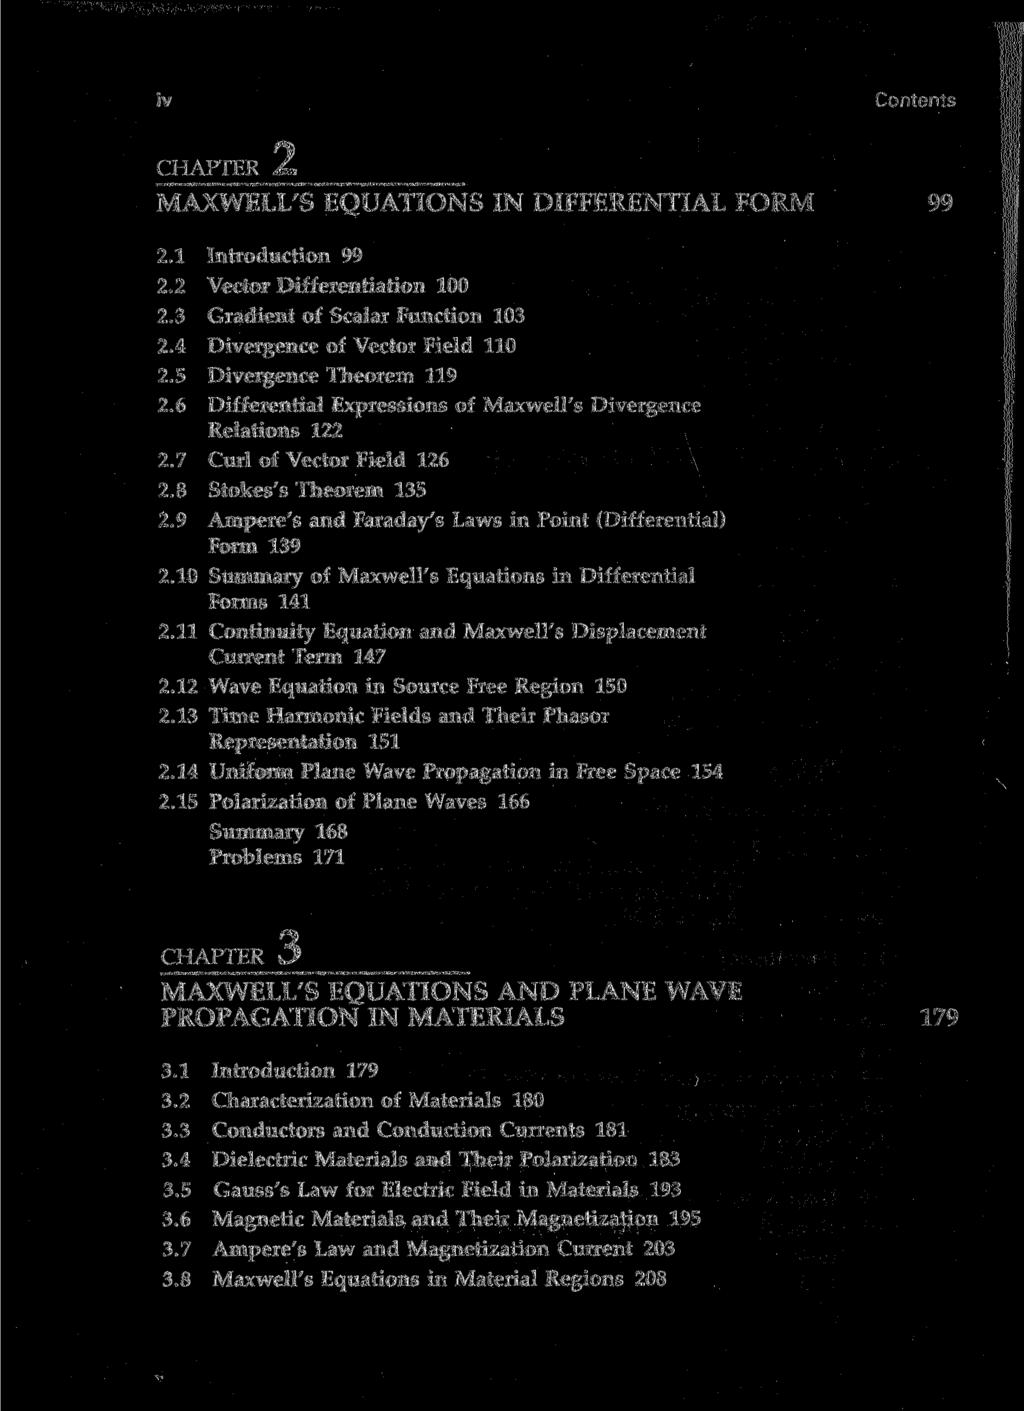 iv Contents L. MAXWELL'S EQUATIONS IN DIFFERENTIAL FORM 99 2.1 Introduction 99 2.2 Vector Differentiation 100 2.3 Gradient of Scalar Function 103 2.4 Divergence of Vector Field 110 2.